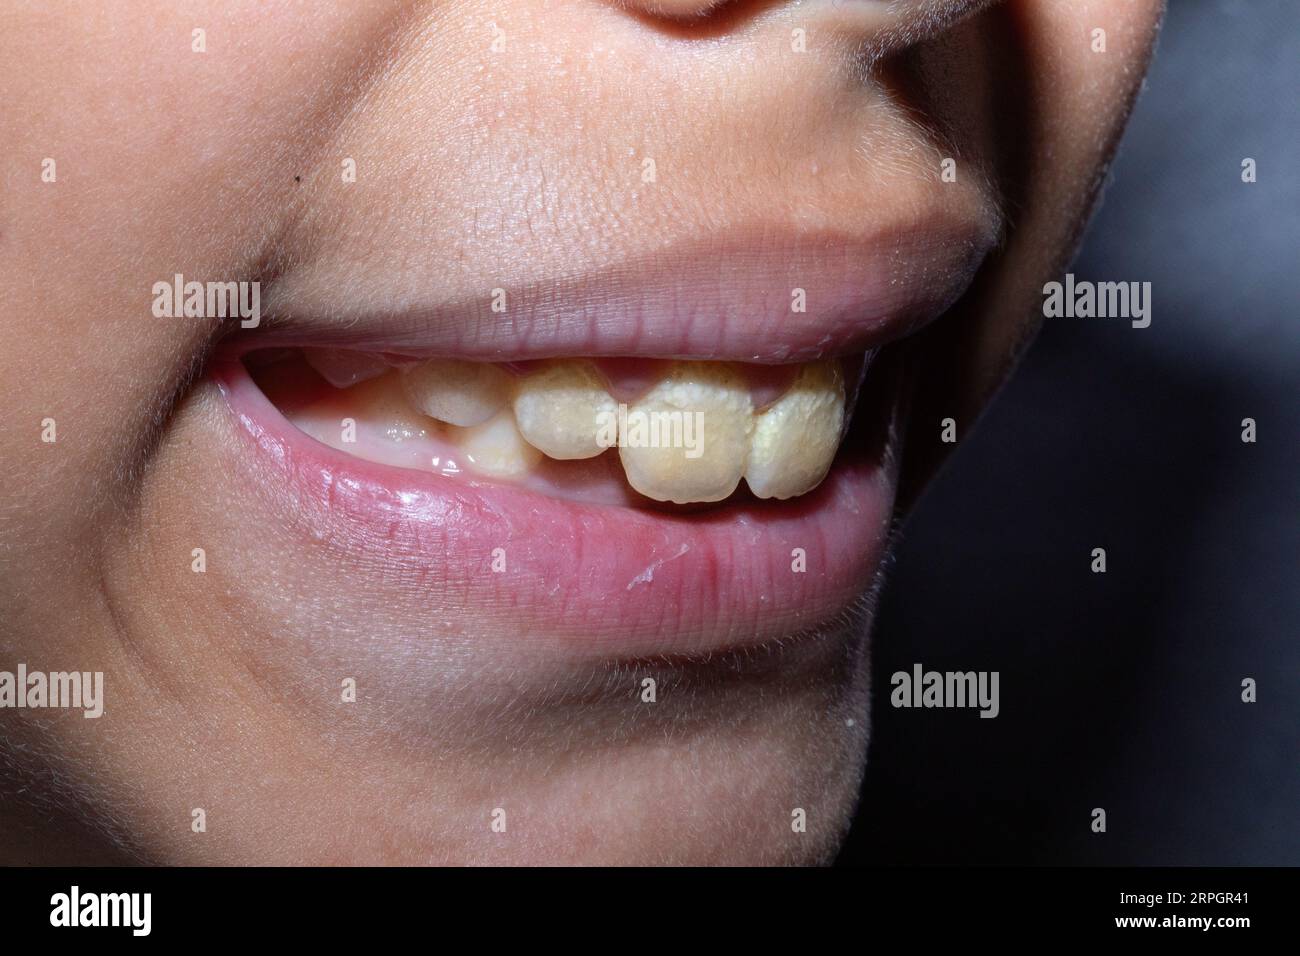 Macro of neglected baby teeth, with plaque and tartar and black fungus. Condition of poor oral hygiene with risk of bacterial infection. Stock Photo